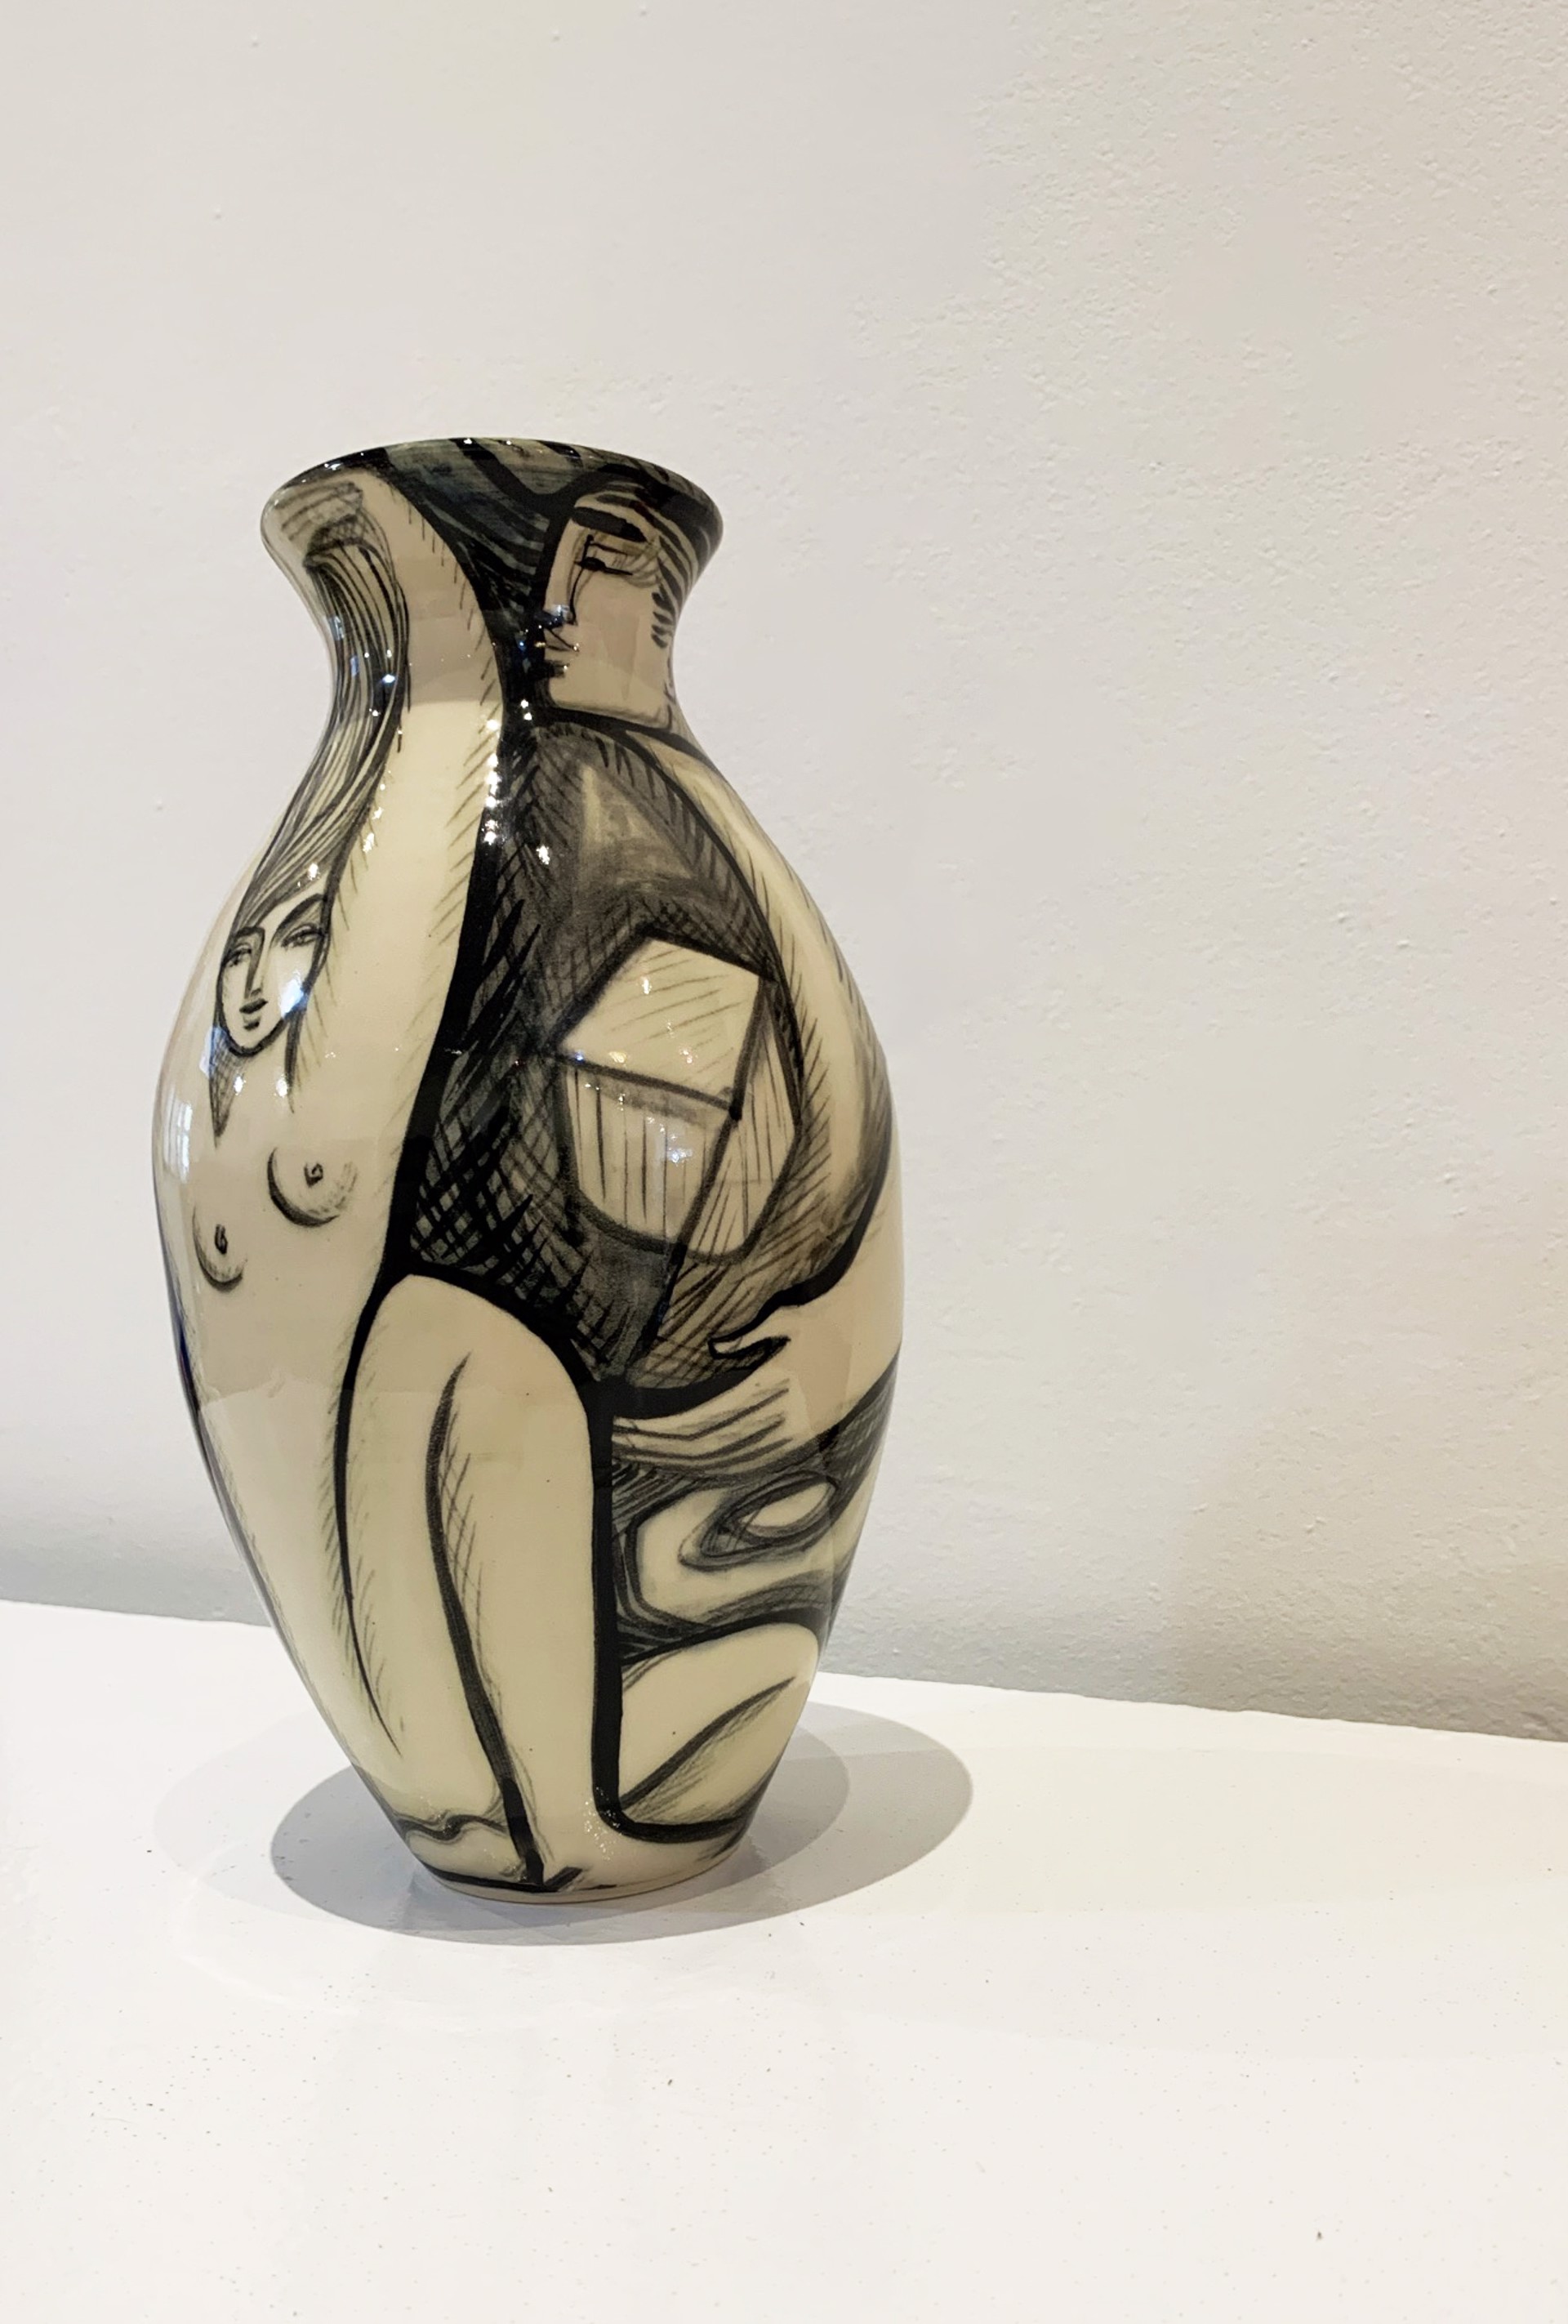 Vase #18 by Ken and Tina Riesterer